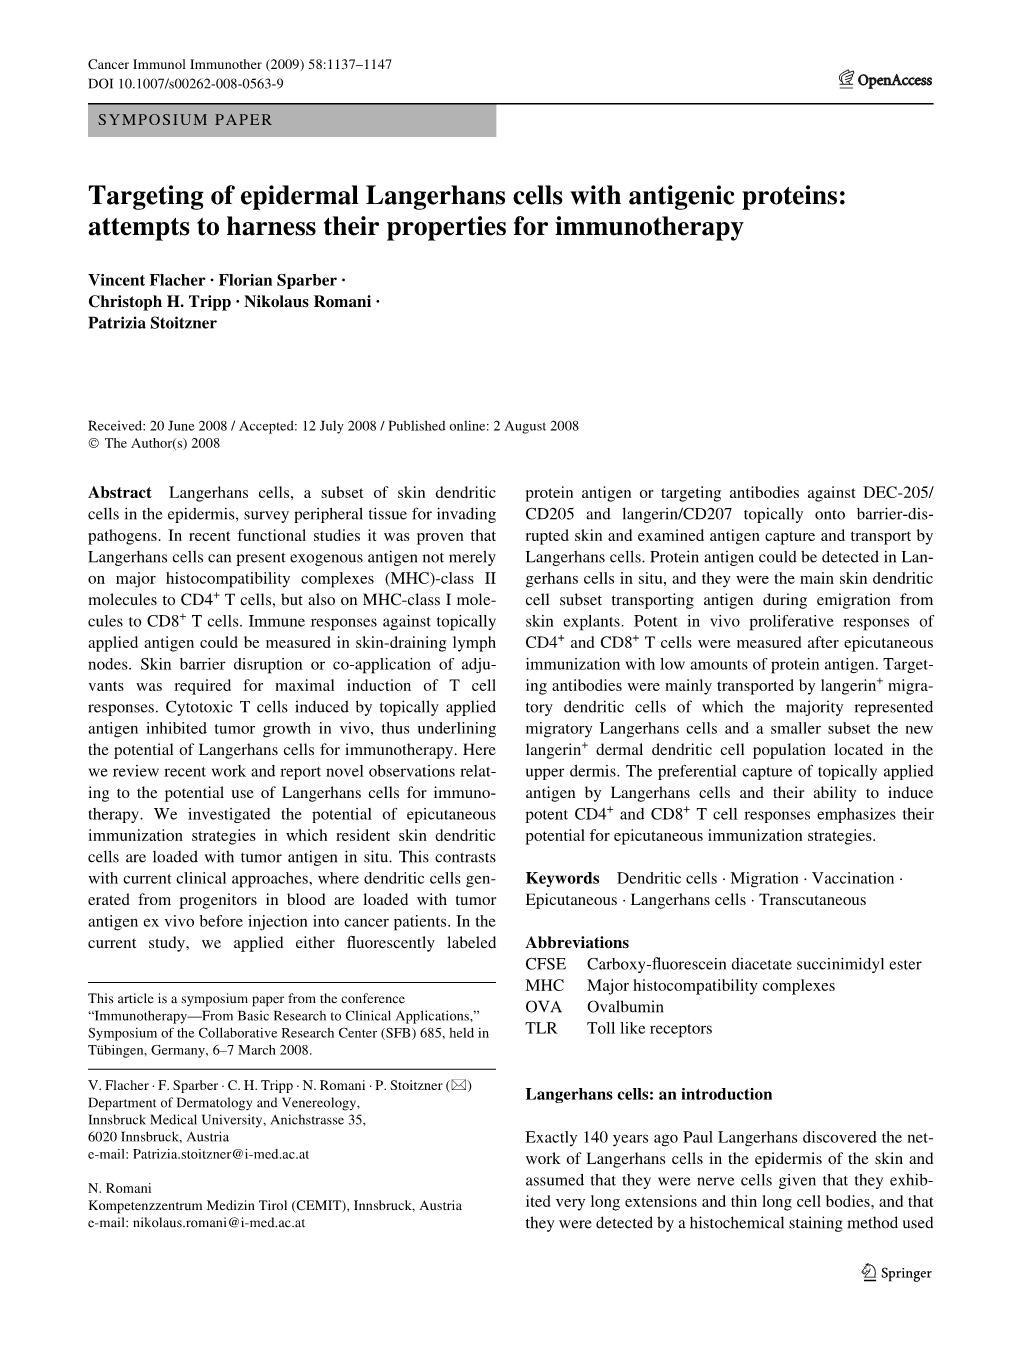 Targeting of Epidermal Langerhans Cells with Antigenic Proteins: Attempts to Harness Their Properties for Immunotherapy